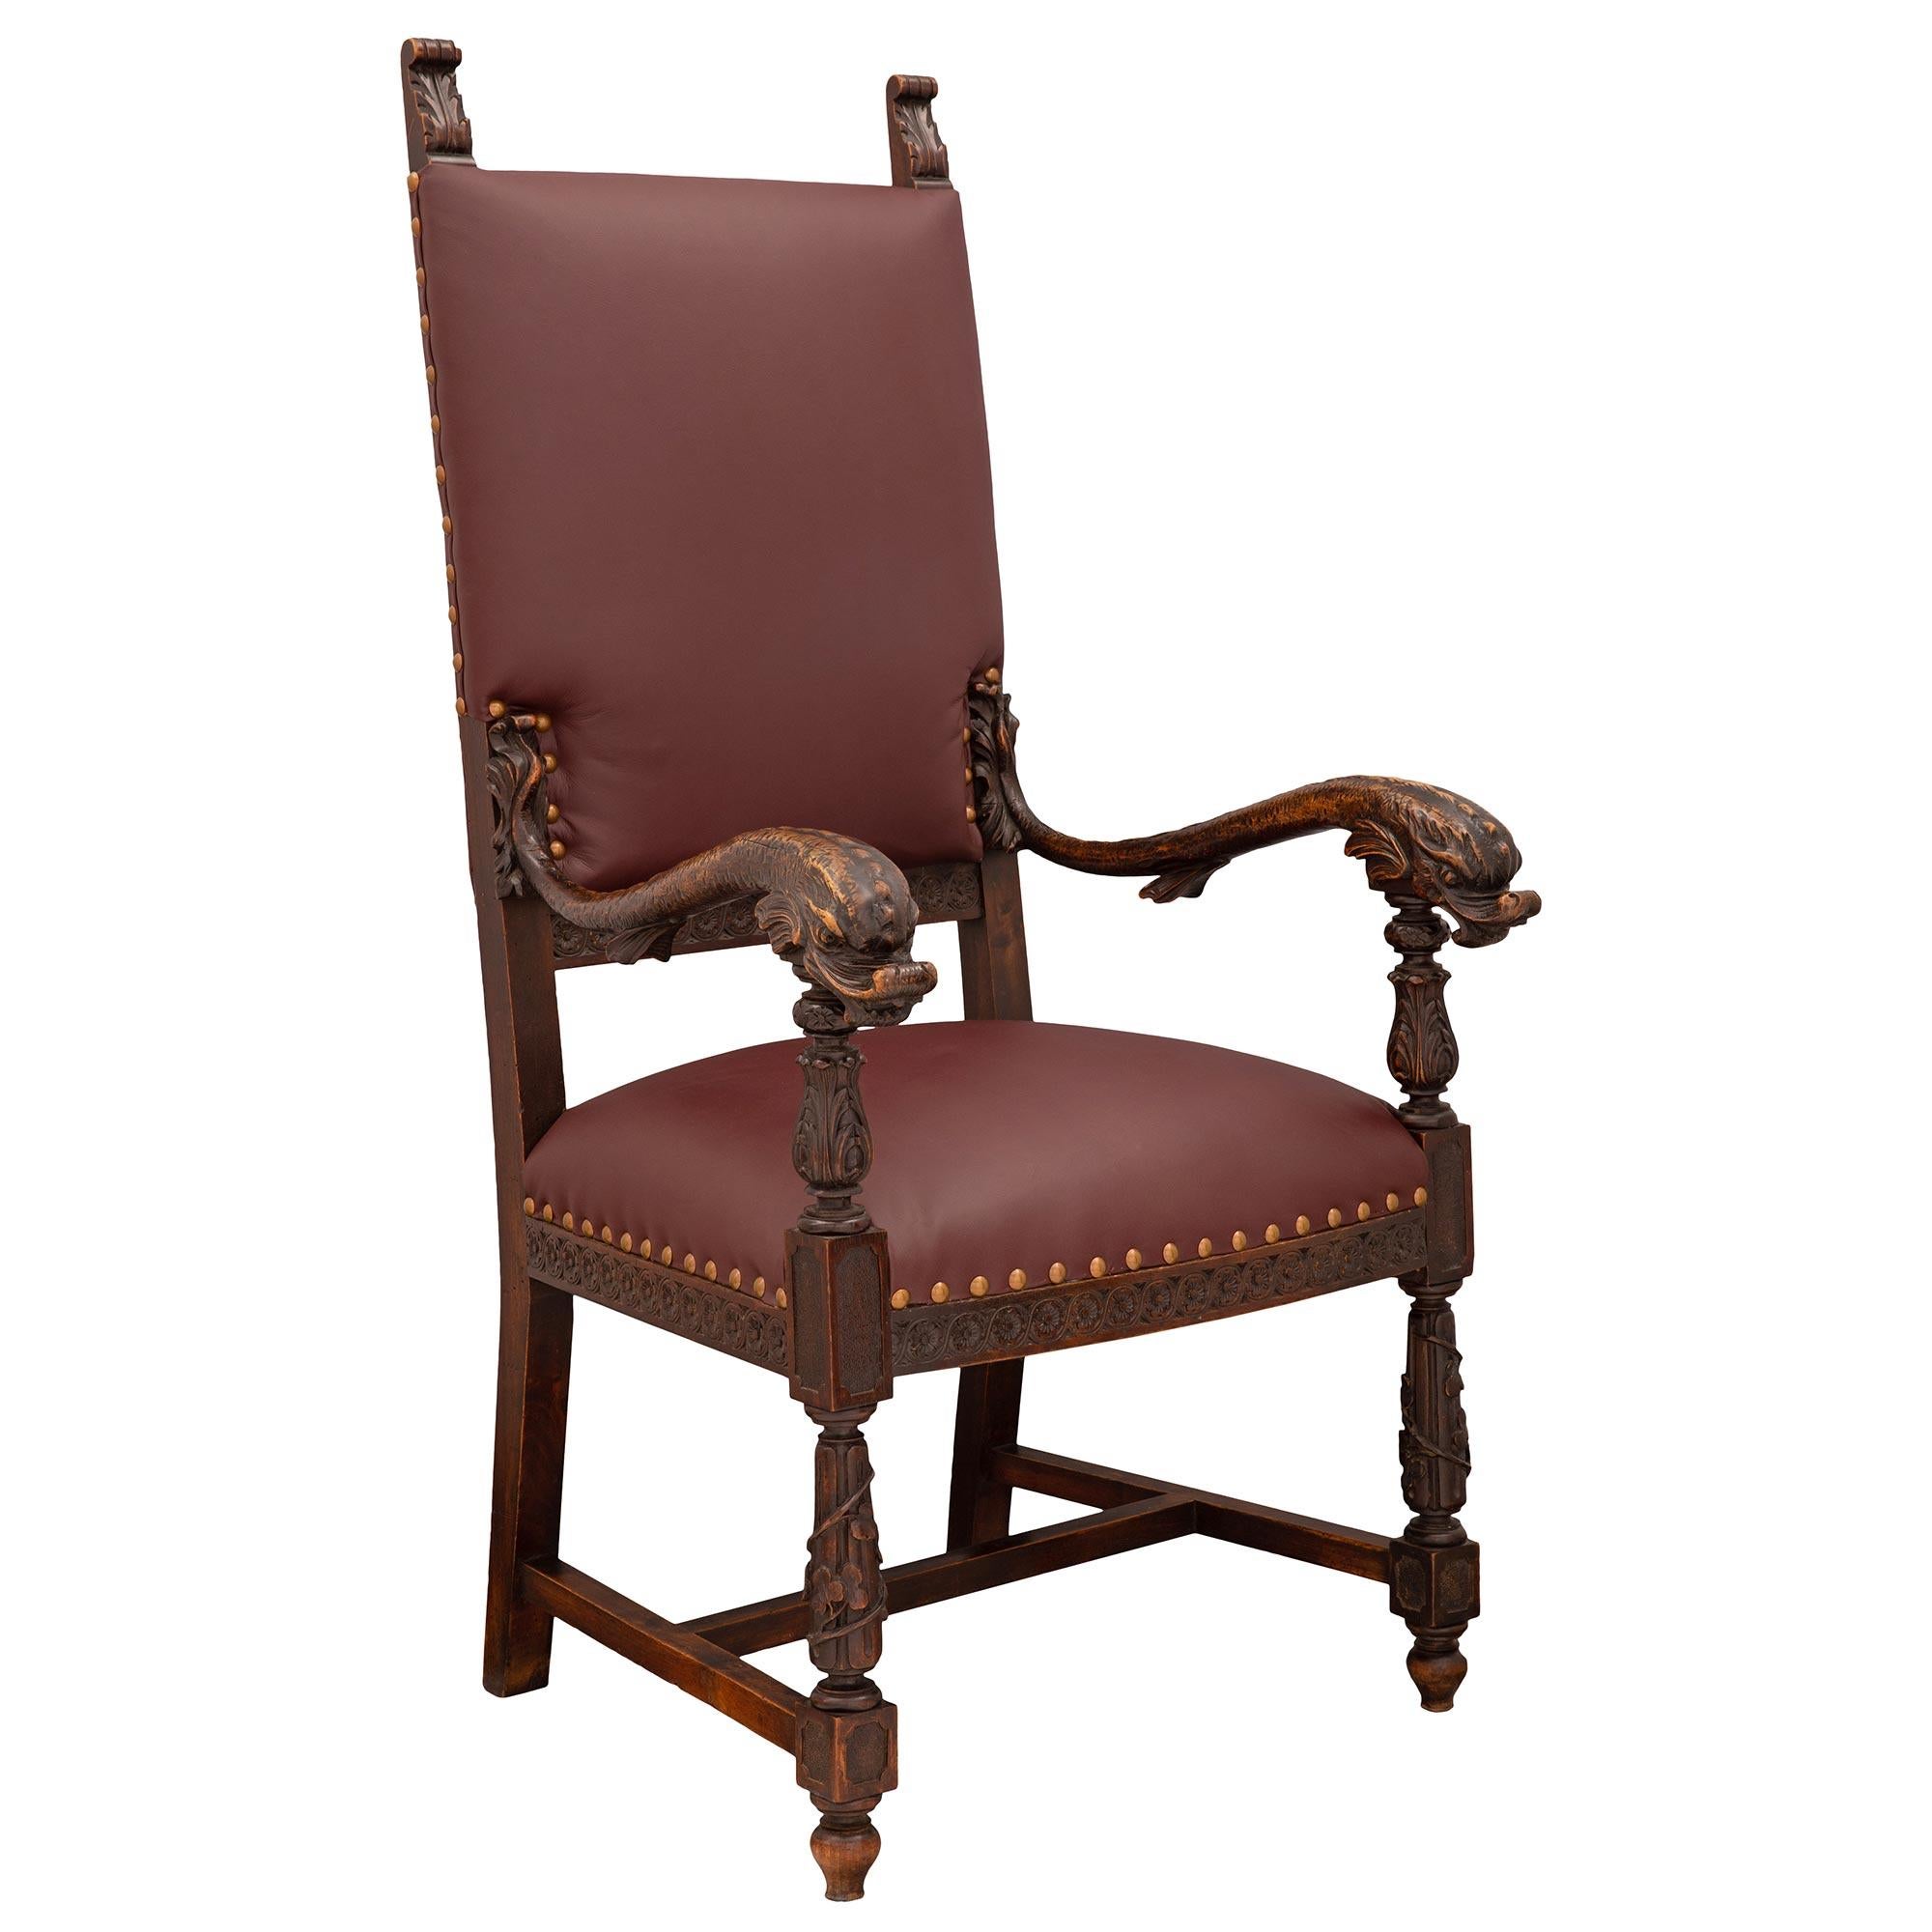 A most handsome pair of Italian mid-19th century Baroque st. dark oak and leather throne armchairs. Each chair is raised by elegant topie shaped feet below block reserves and unique inverted circular tapered fluted legs wrapped with a most